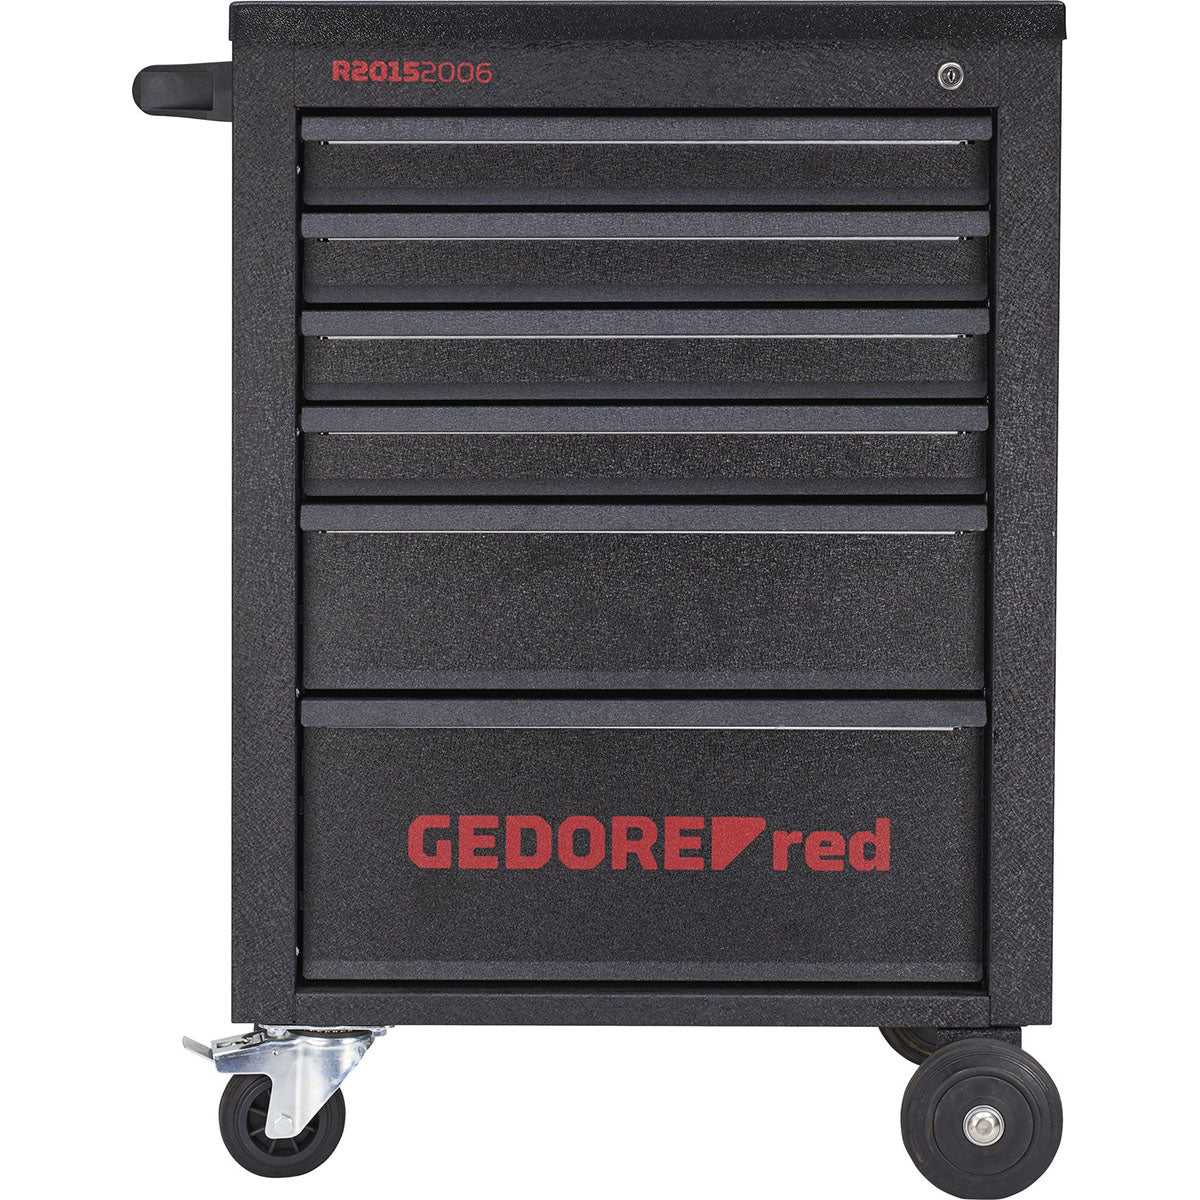 GEDORE red R20152006 - MECHANIC black workshop trolley, with 6 drawers 910x628x418 mm (3300012)